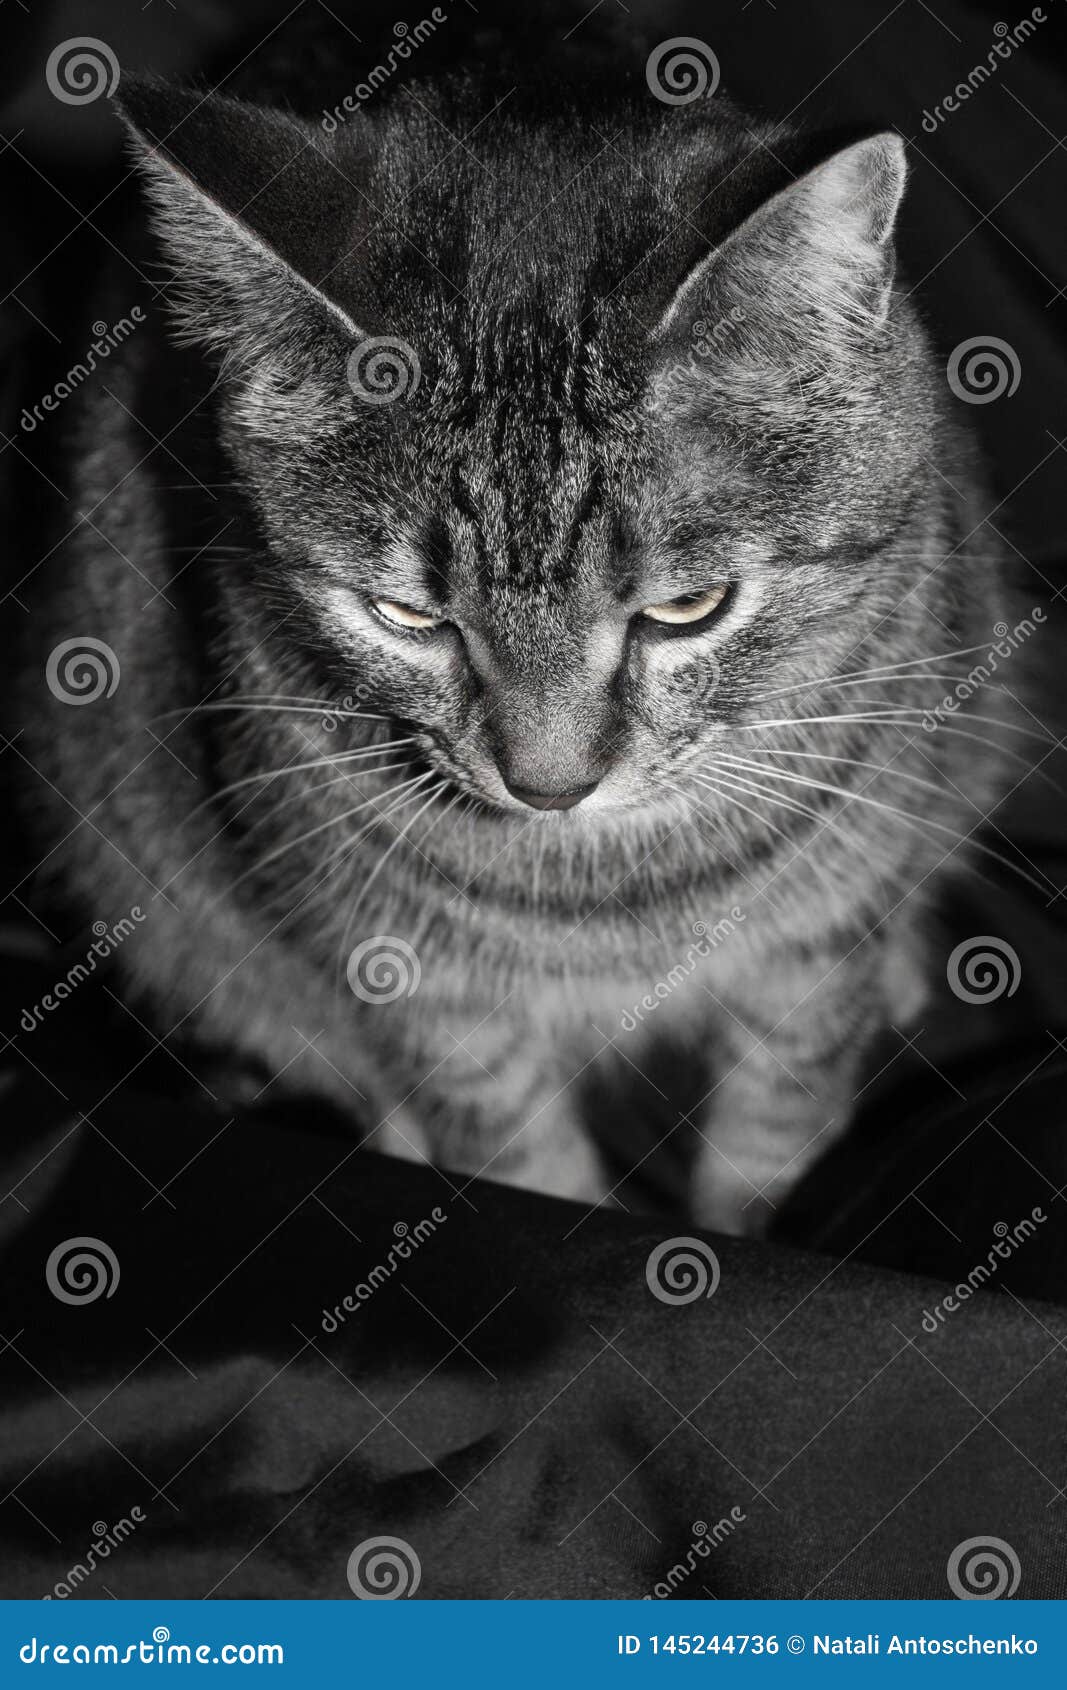 black and white portrait. striped cat  on black background